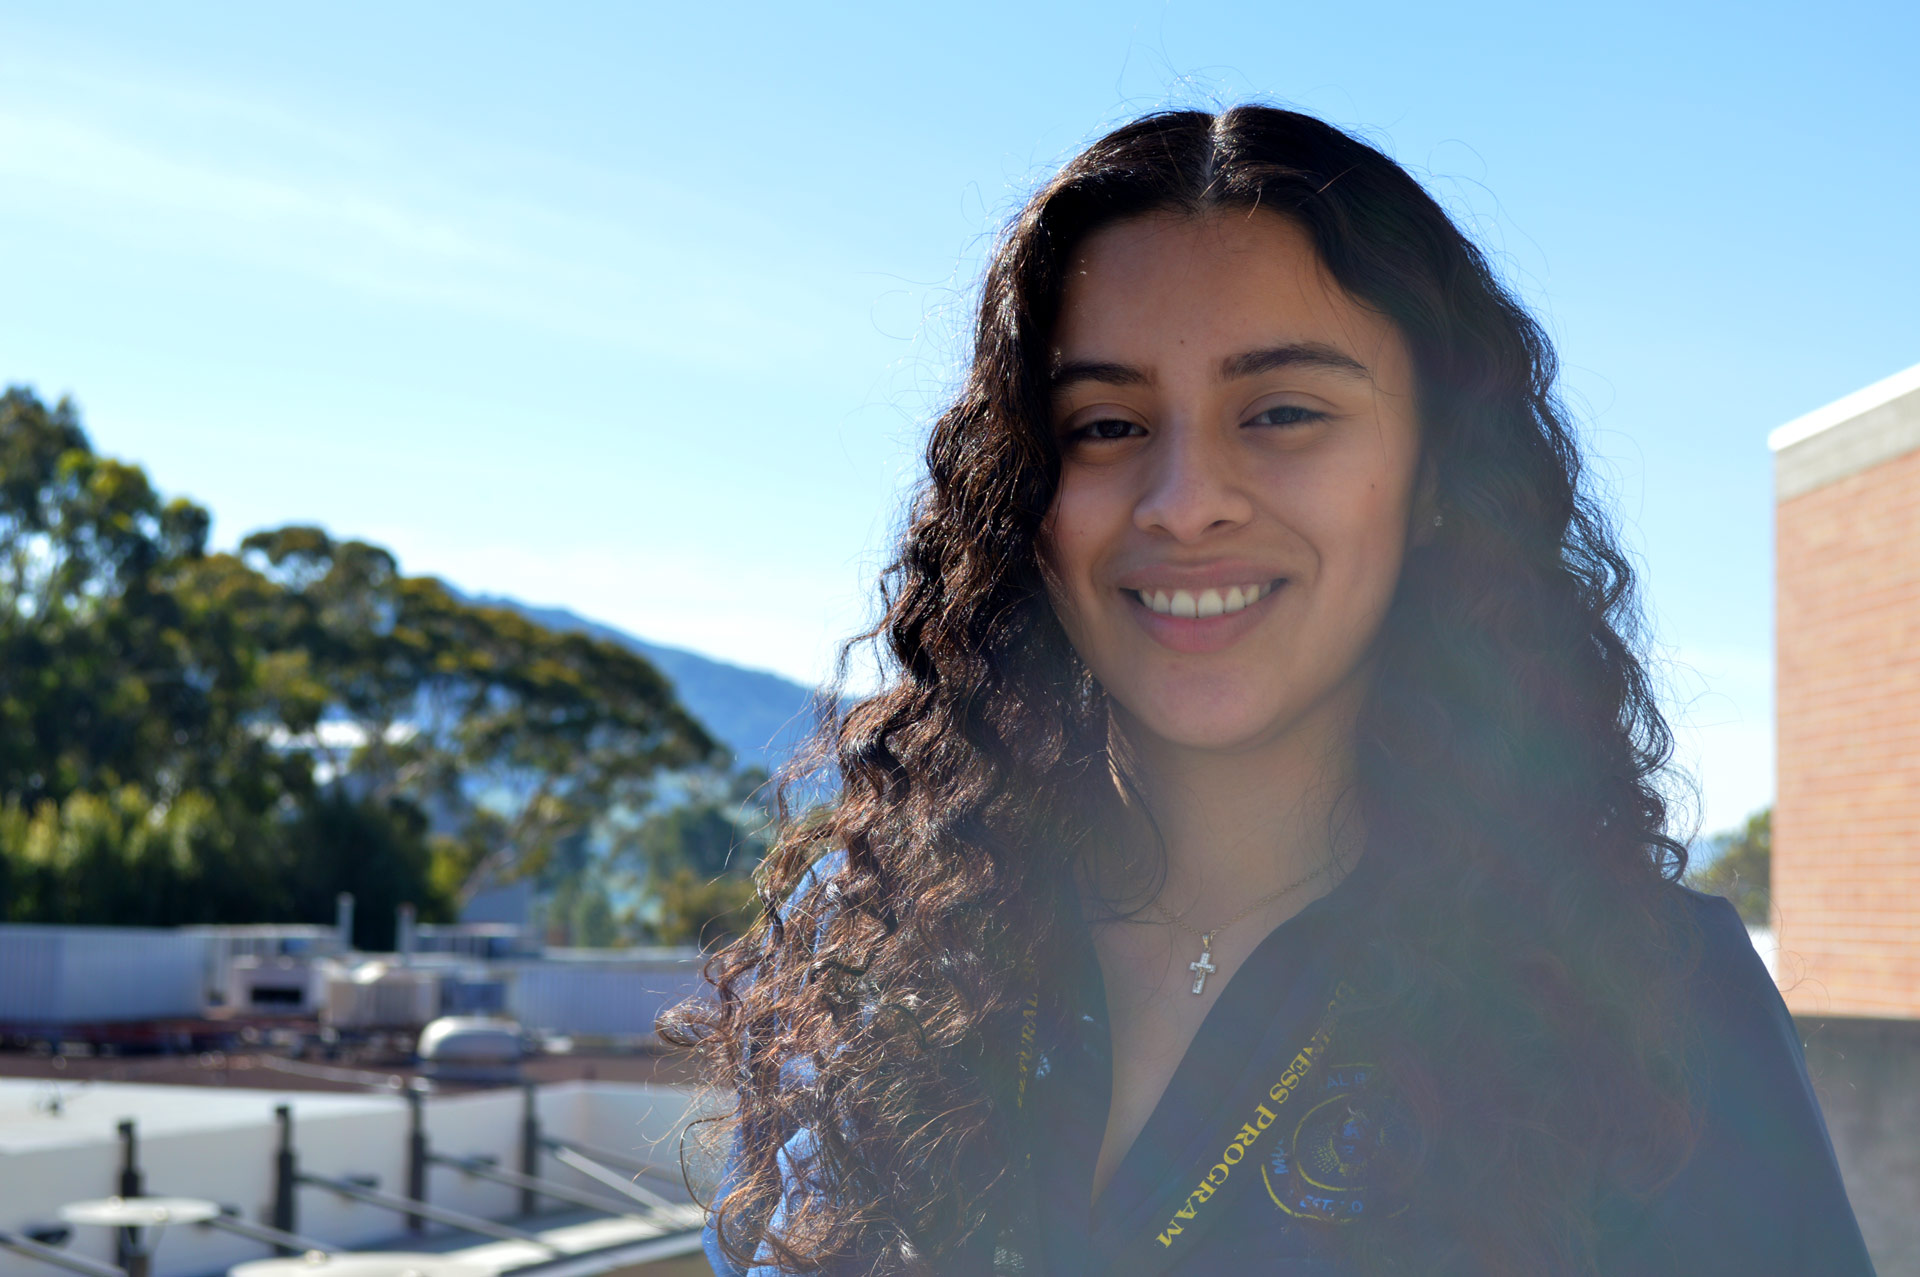 Diversity and inclusion means fostering an environment in which all members are treated equitably and respectfully, economics senior Arly Rivas-Lovo said.